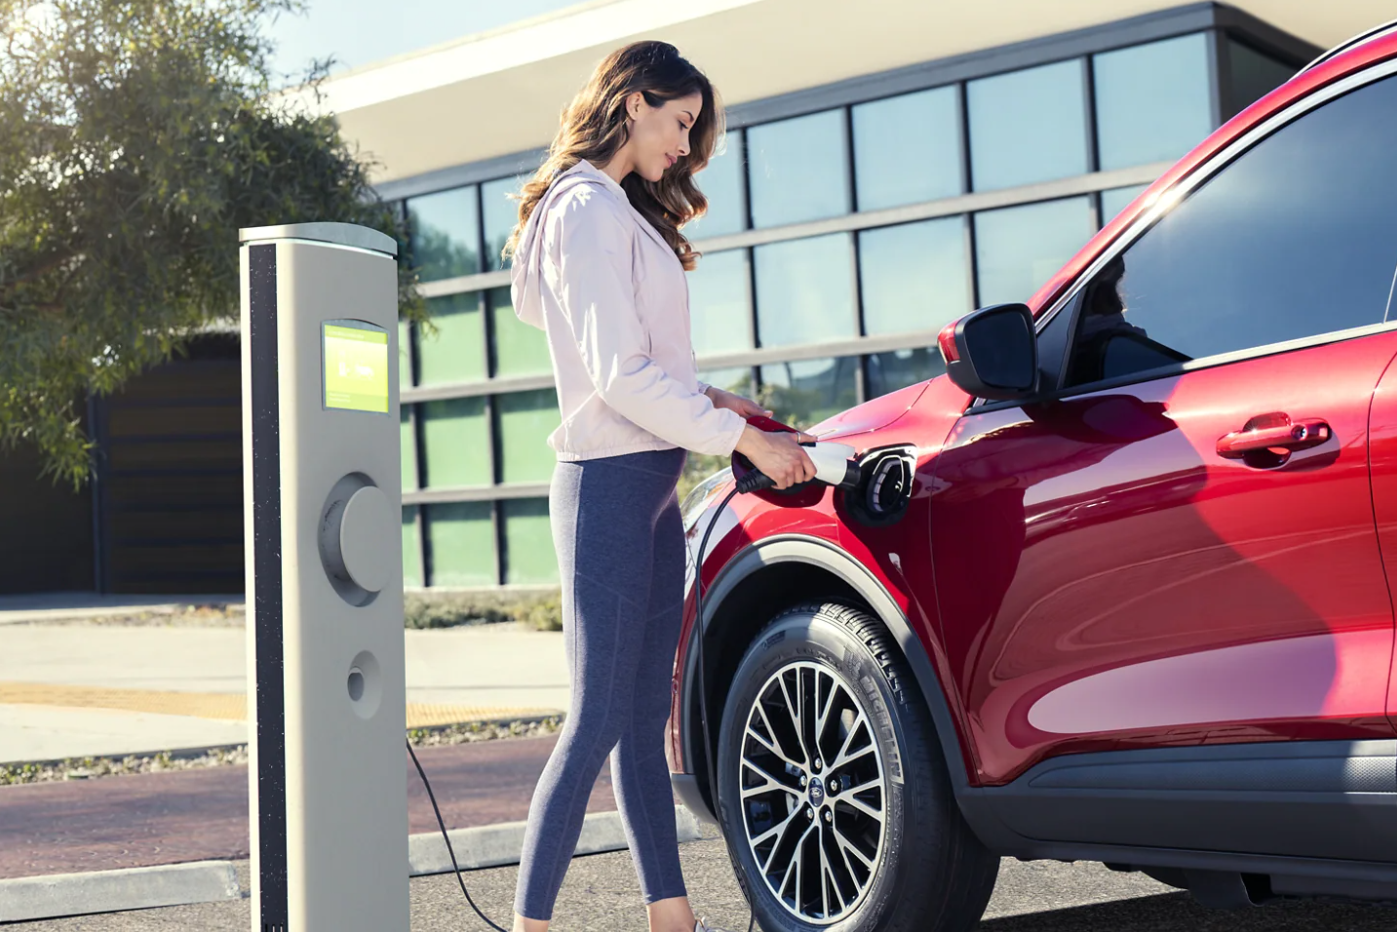 A woman plugs in her hybrid, red 2022 Ford Escape to a charging station in an urban setting on a sunny day.